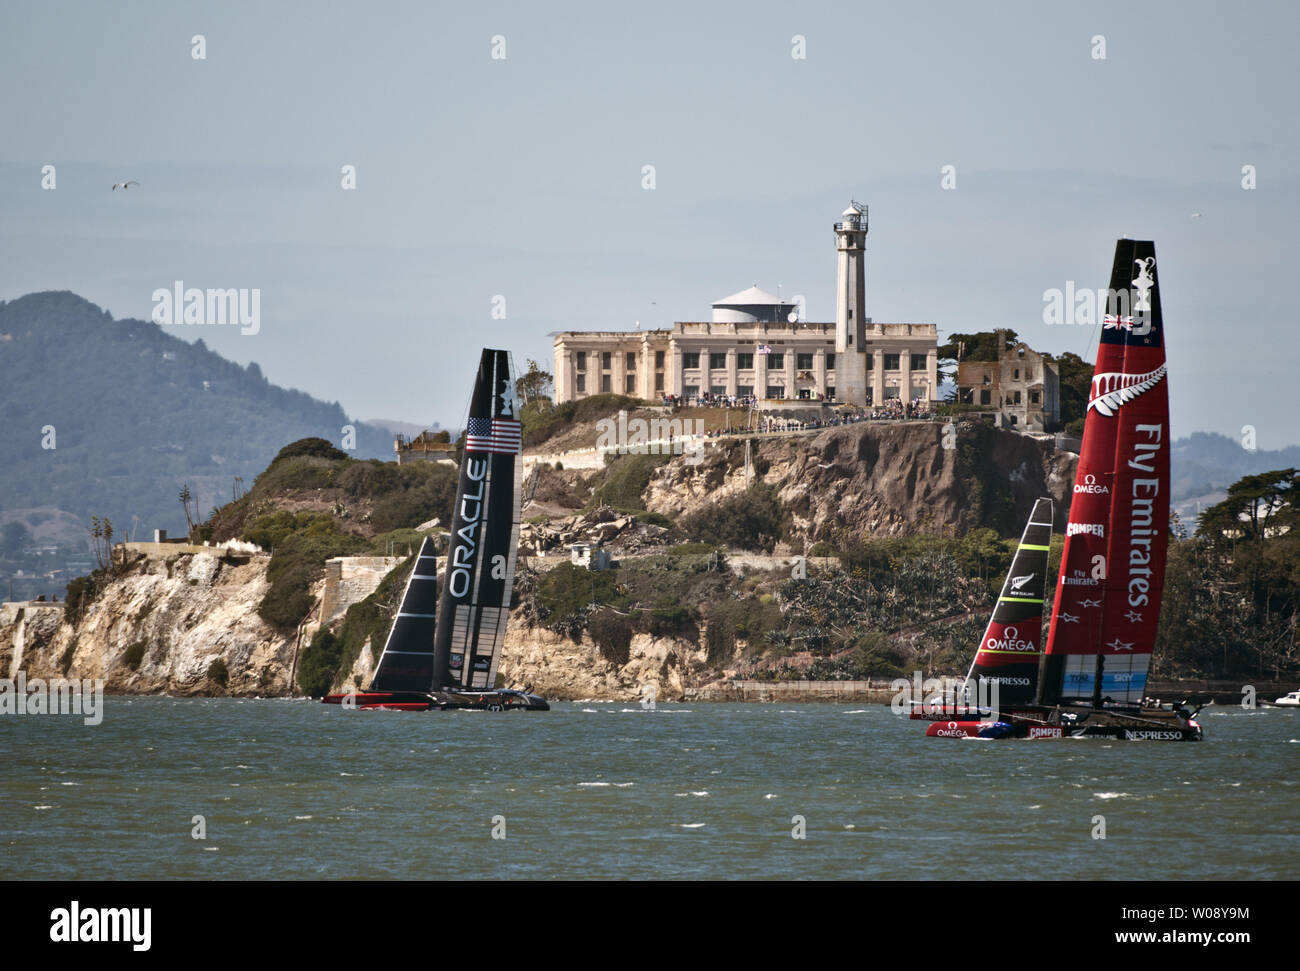 Oracle Team USA sails upwind ahead of Emirates New Zealand (R) in race 15 of the America's Cup Regatta on San Francisco Bay on September 22, 2013. The Americans won races 14 and 15 to bring the score to 8-5 in favor of the Kiwis.  UPI/Terry Schmitt Stock Photo